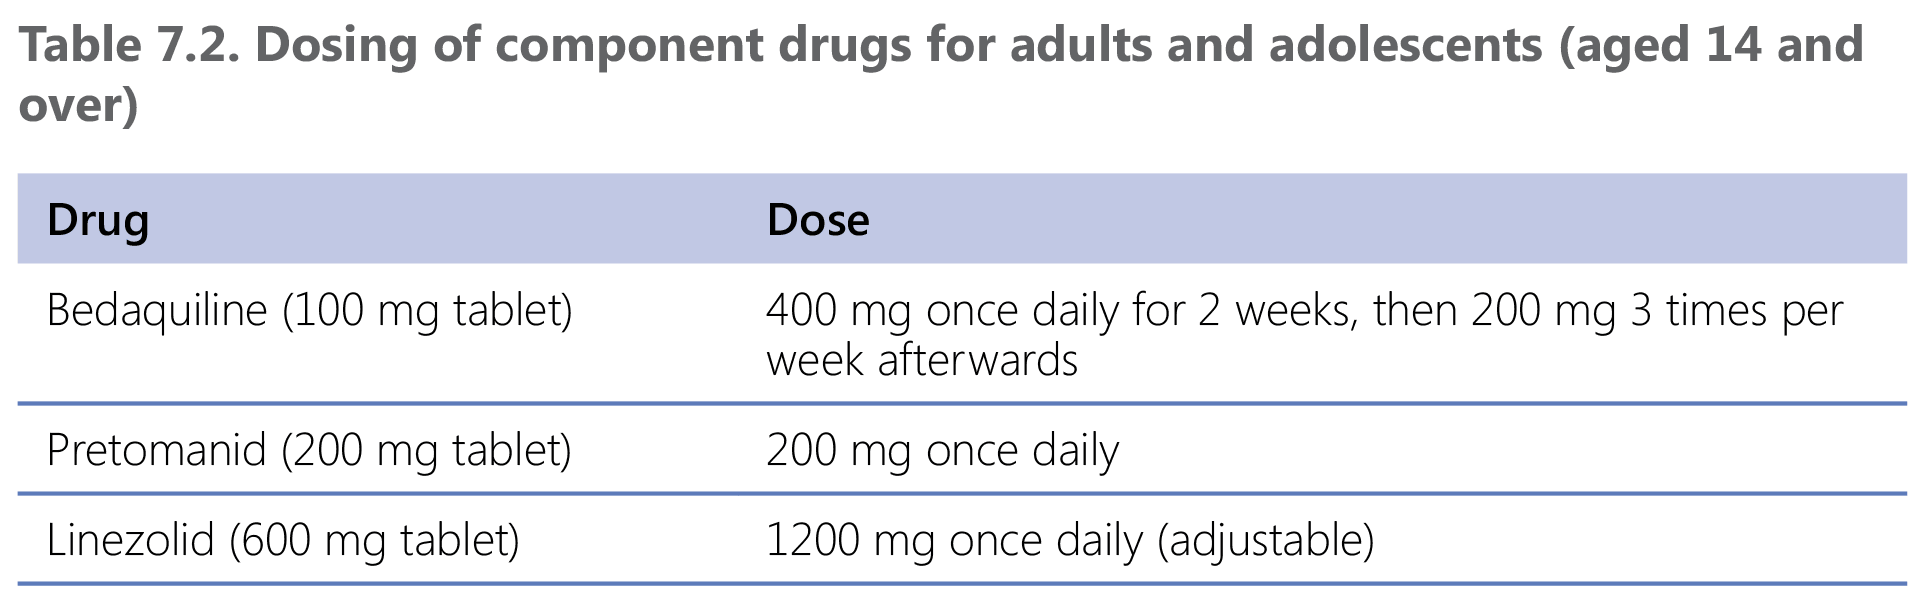 drugs for adults and adolescents